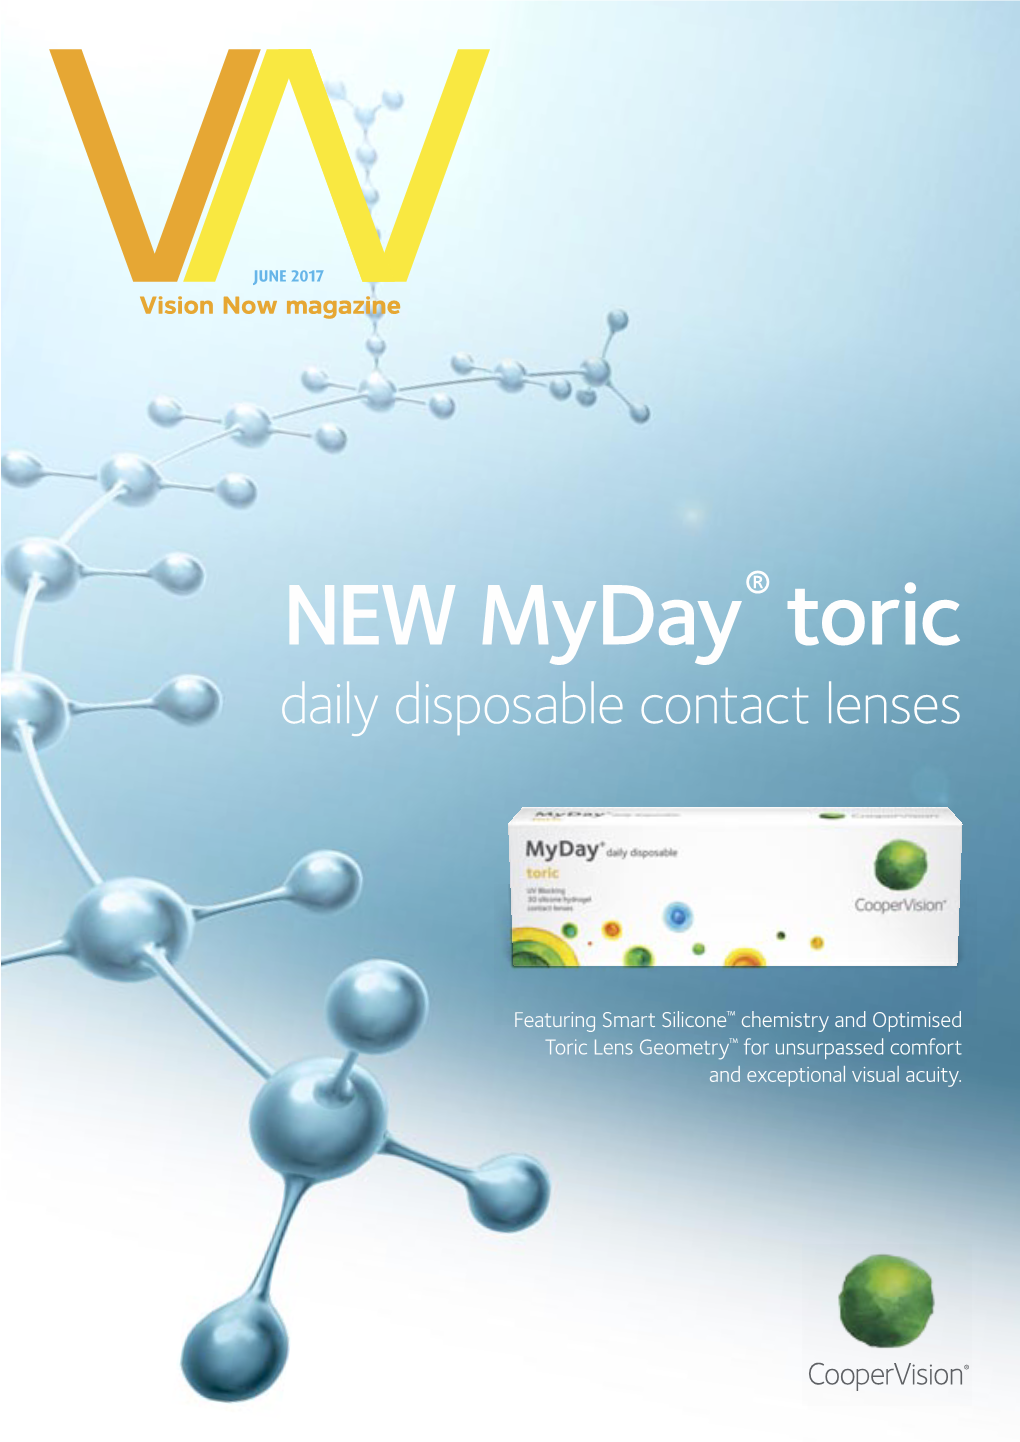 NEW Myday® Toric Daily Disposable Contact Lenses